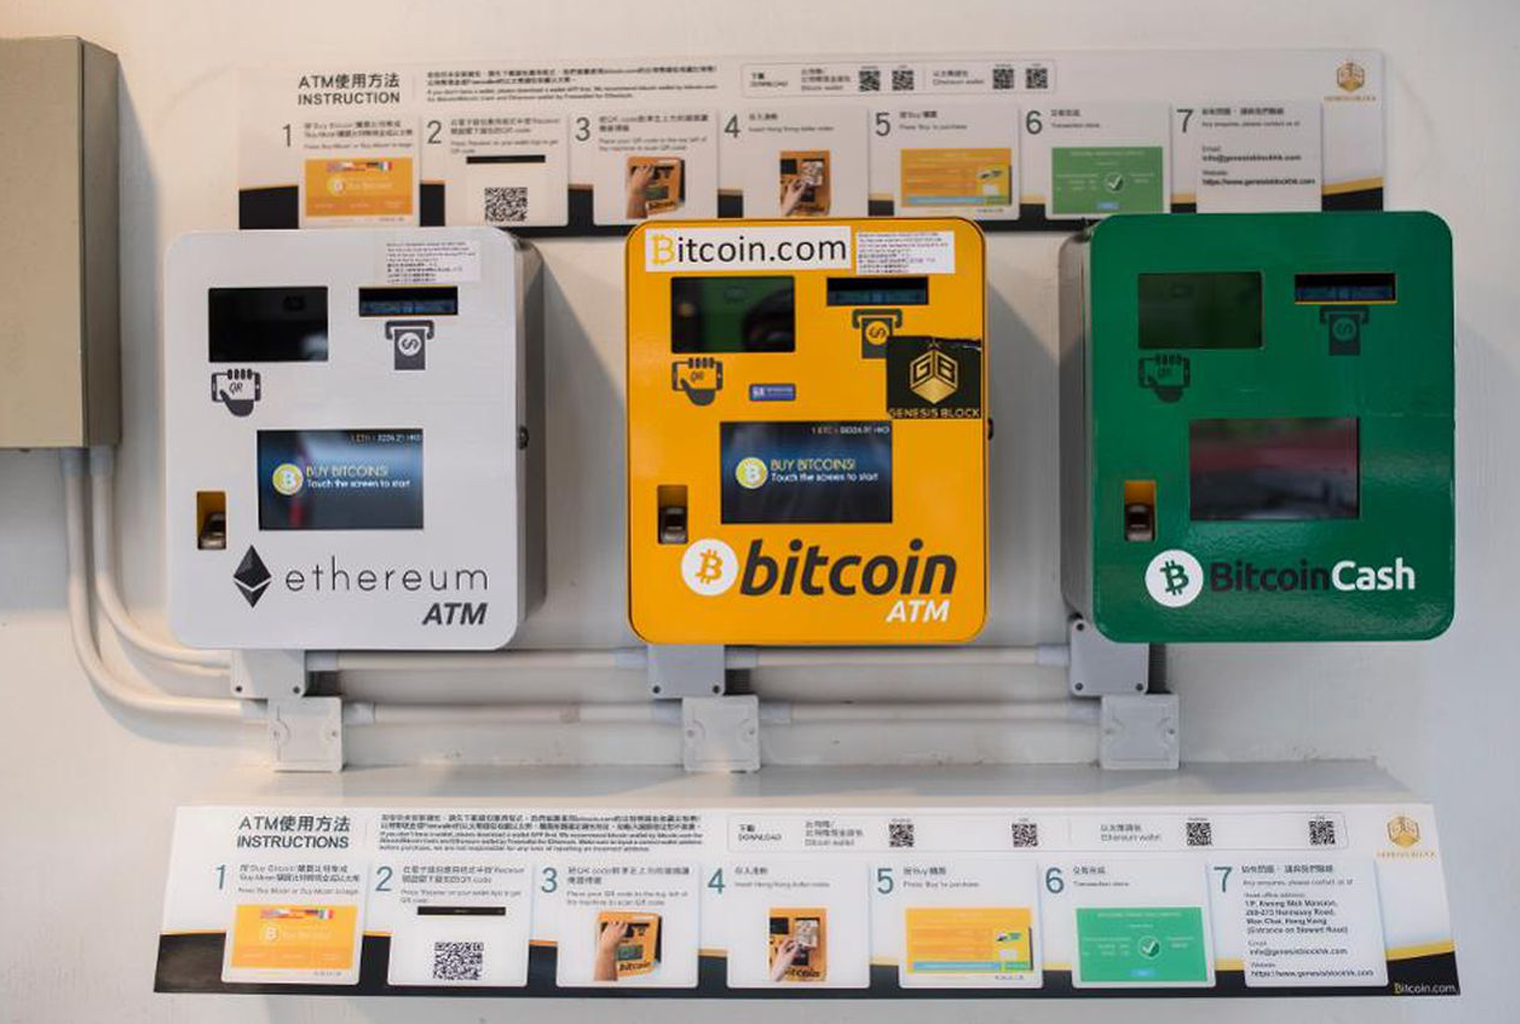 how much can I expect to make owning a bitcoin ATM